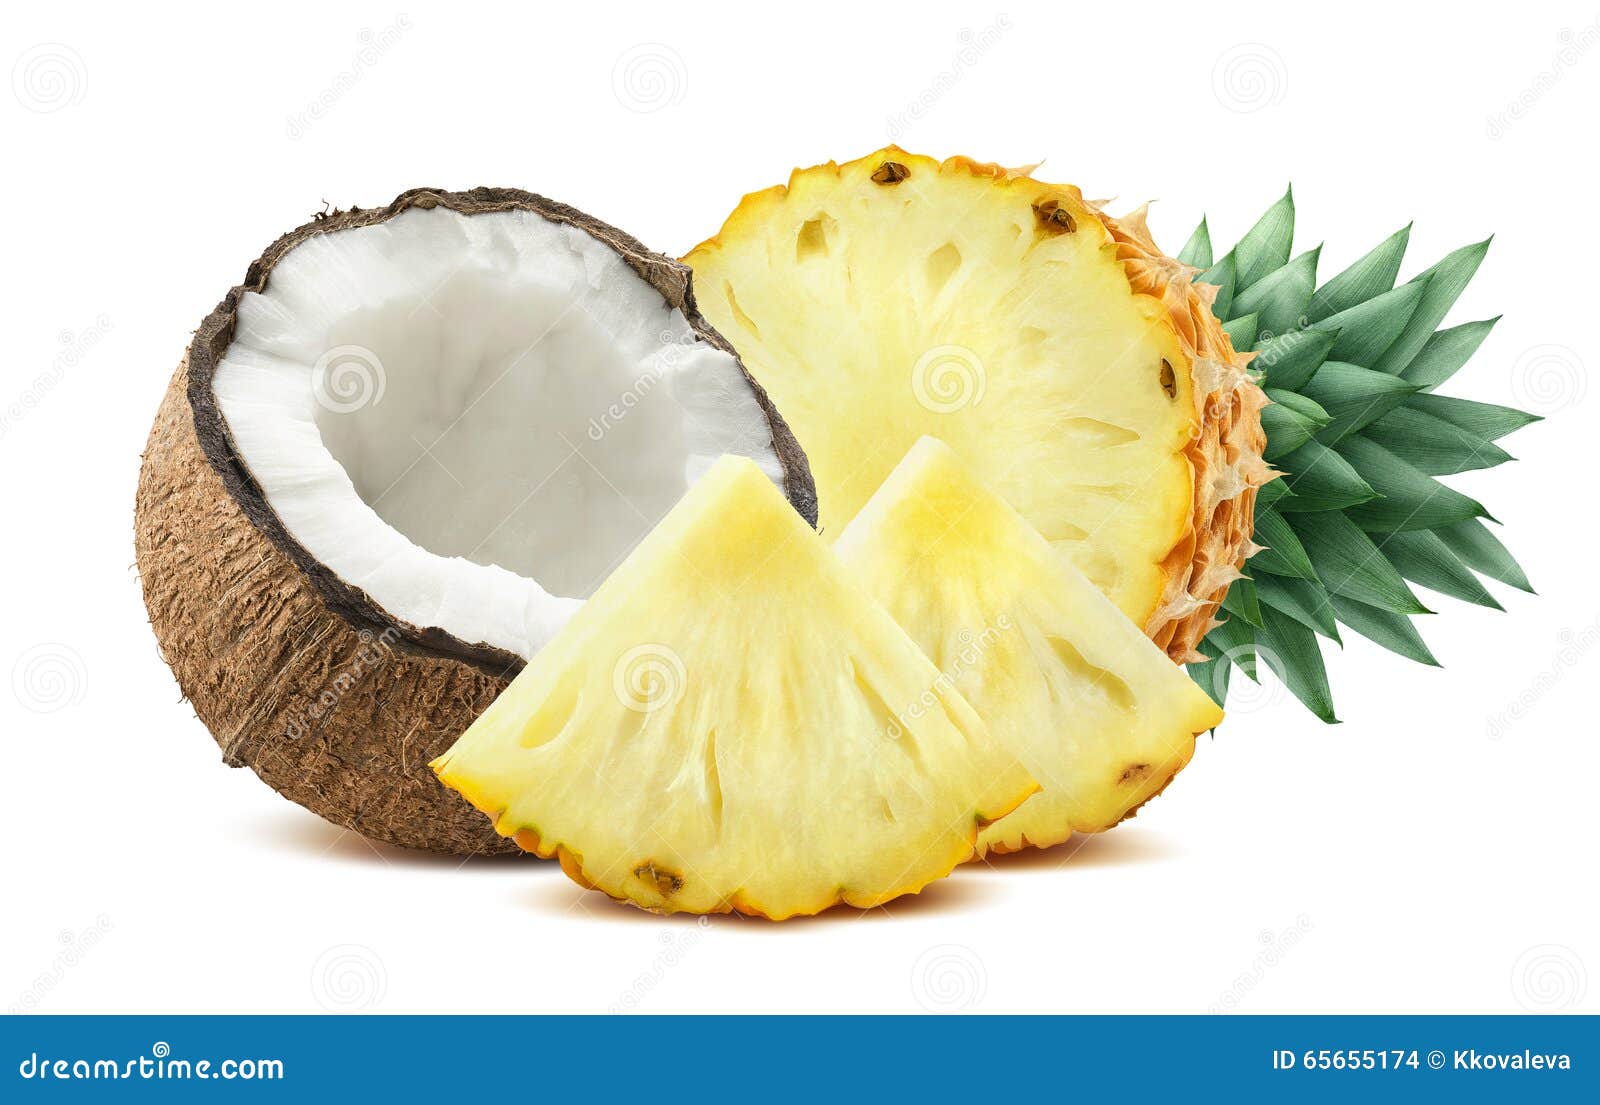 pineapple coconut pieces composition 2  on white background